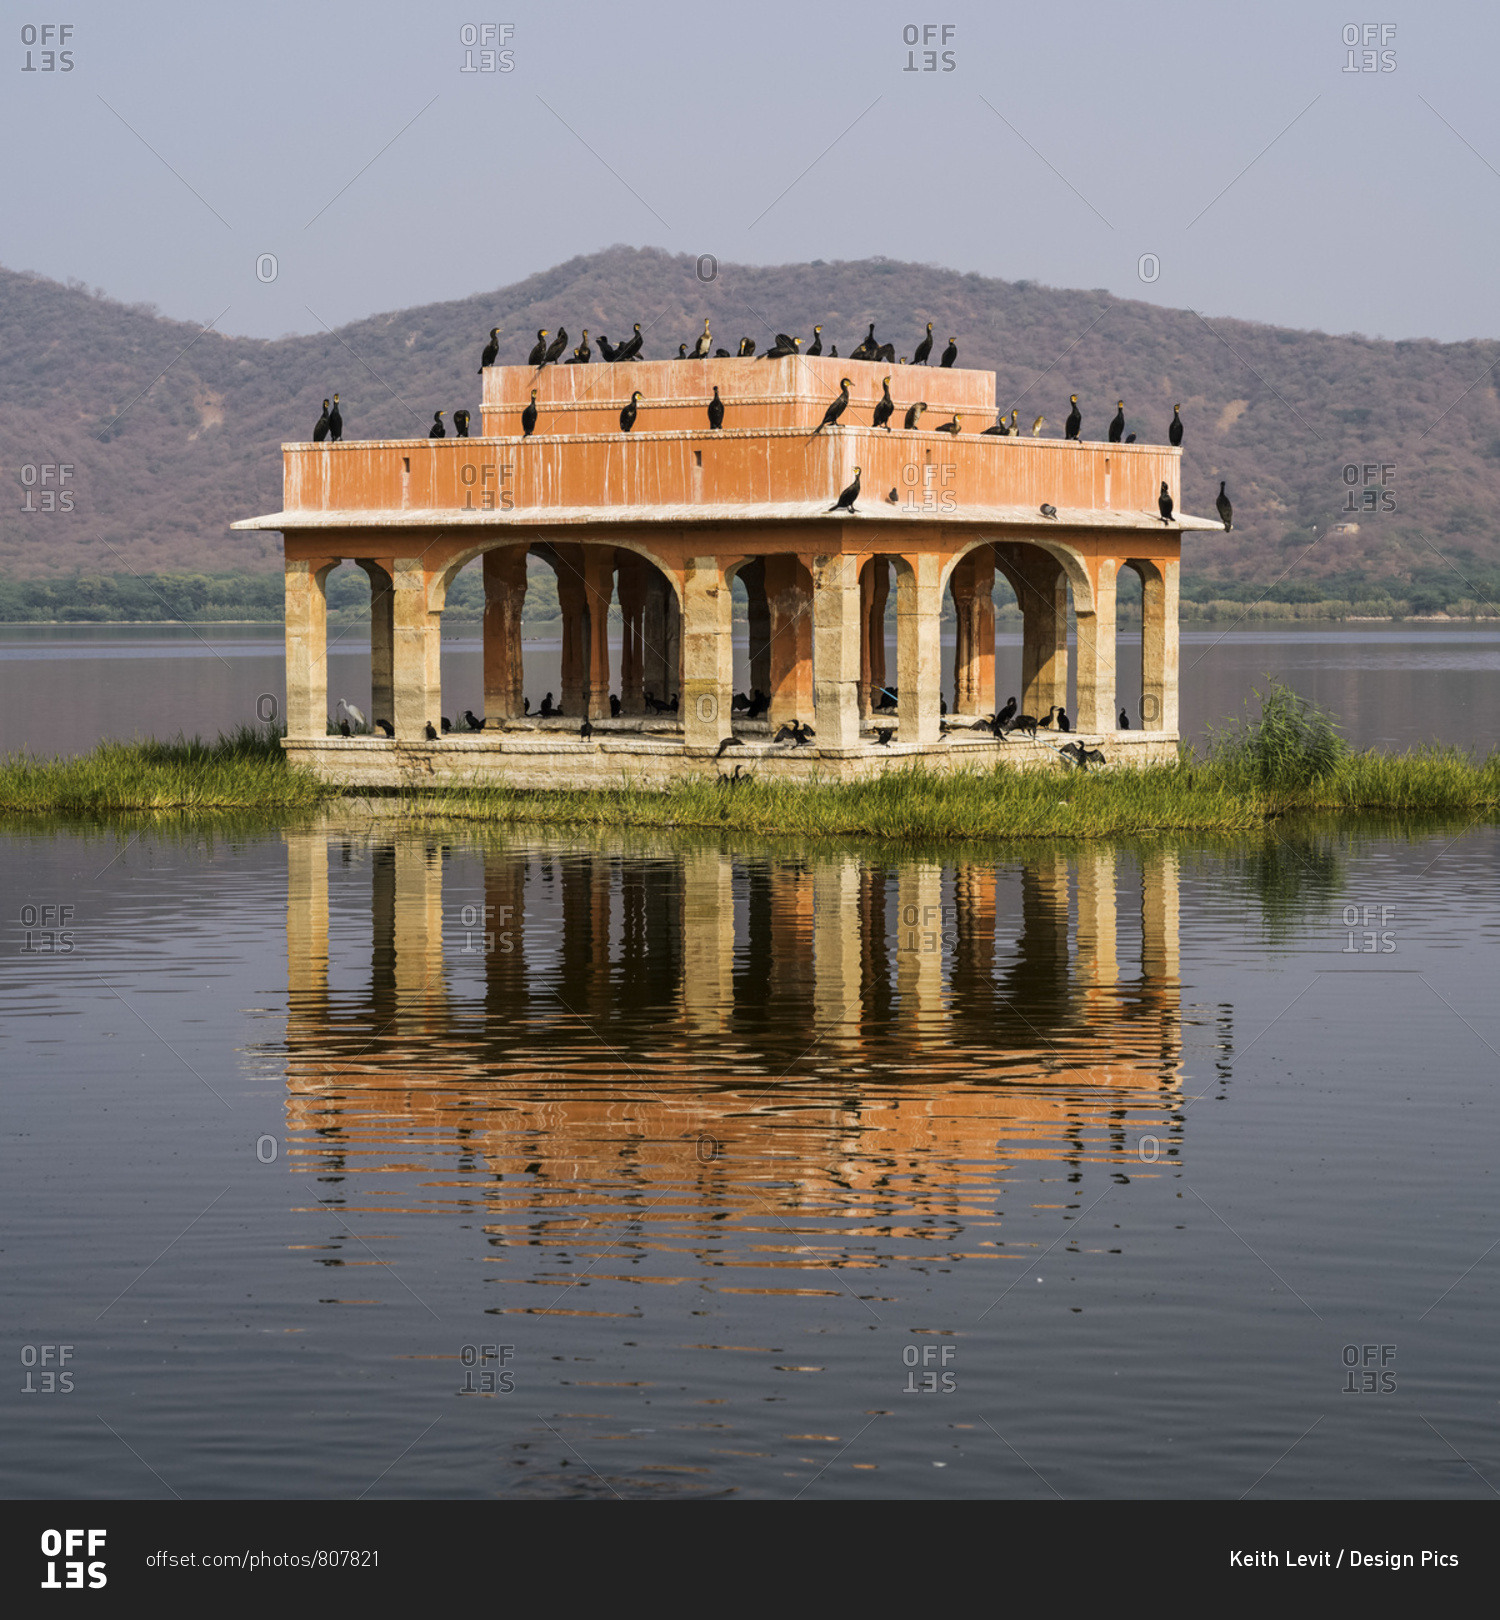 Jal Mahal Palace Submerged In Man Sugar Lake With Birds Perched On It Jaipur Rajasthan India Stock Photo Offset